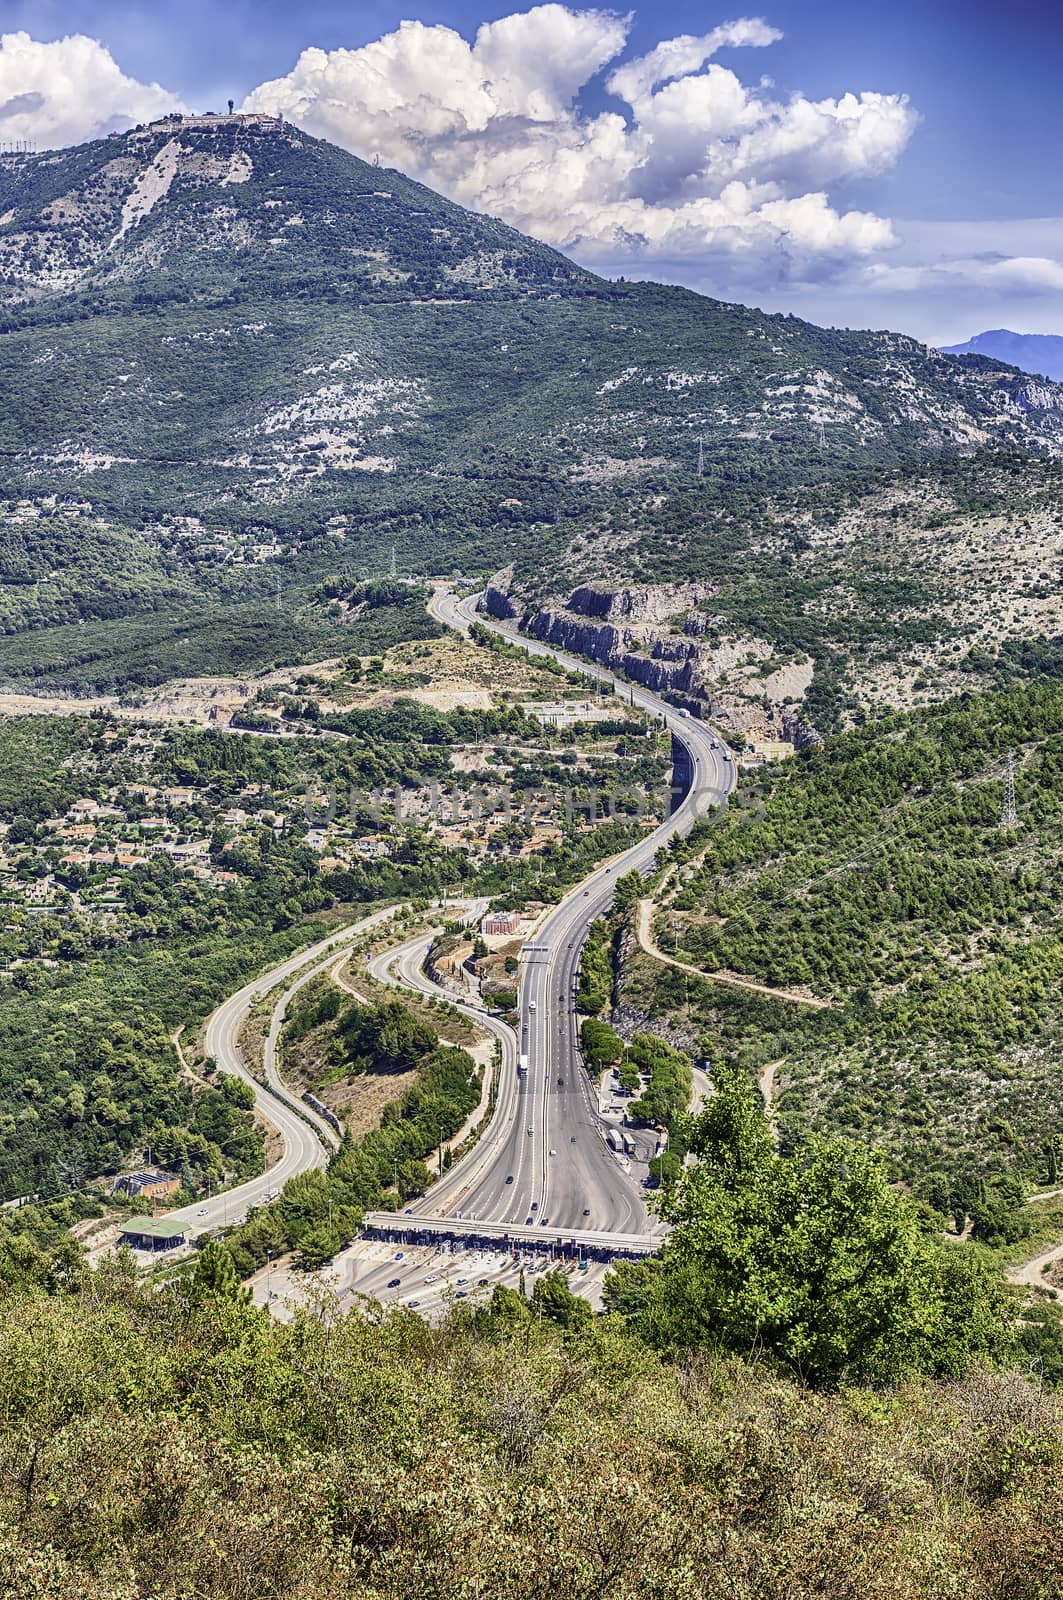 View over the highway in French Riviera, as seen from Fort de la Revere near the village of Èze, Cote d'Azur, France